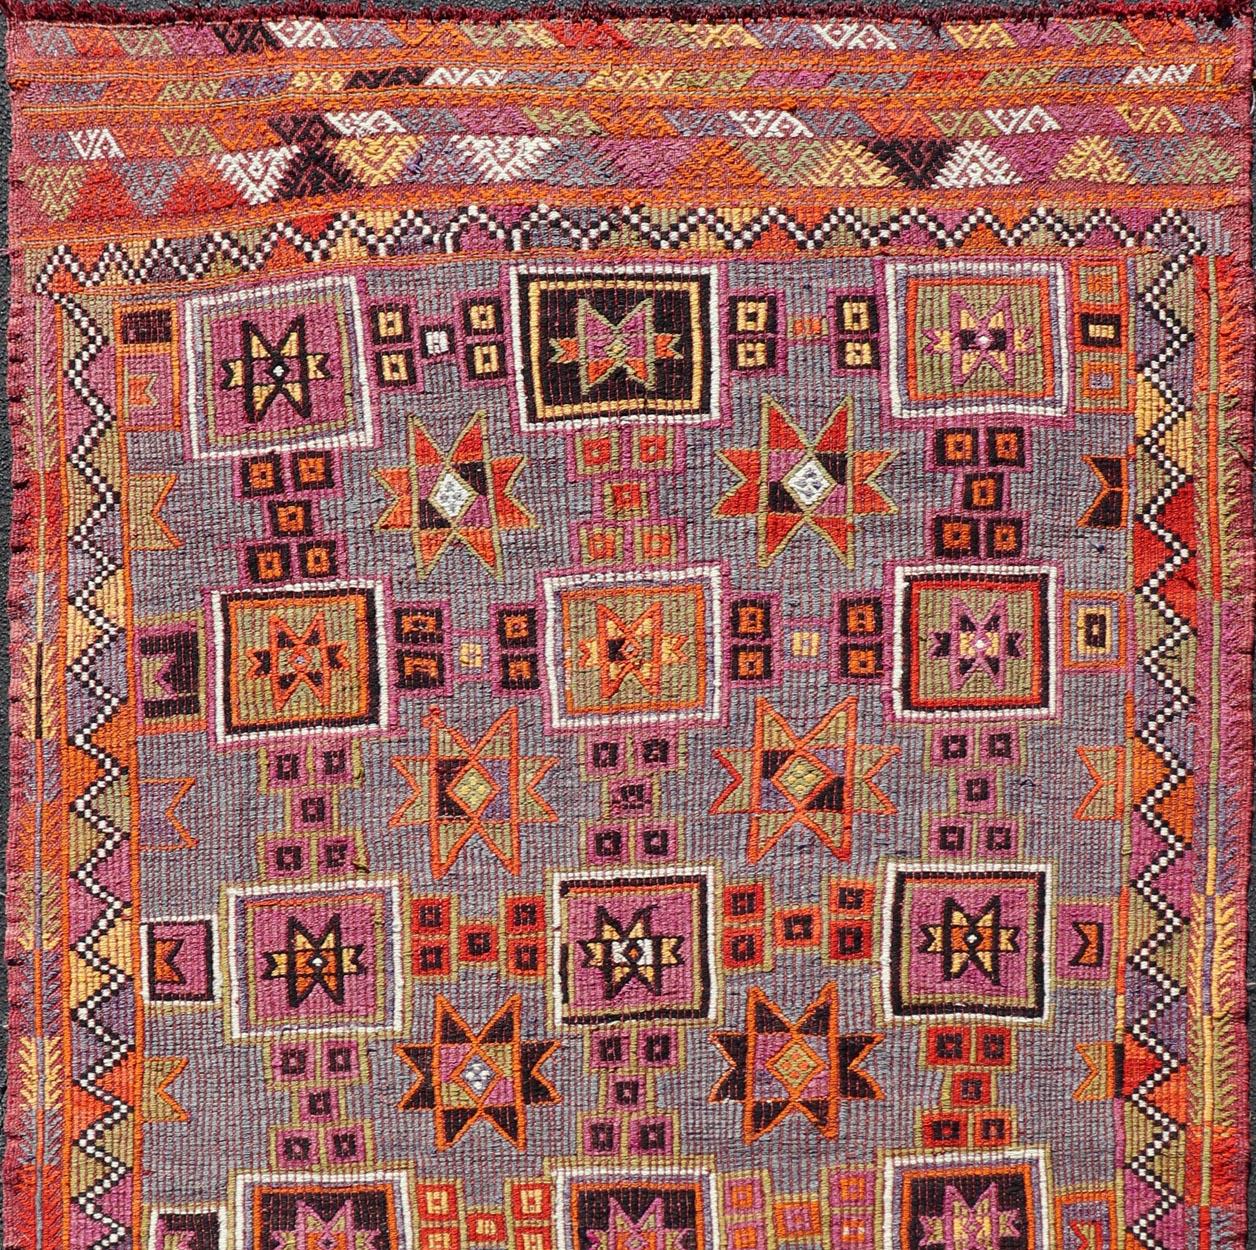 Hand-Knotted Colorful Vintage Kilim Embroidered Jajeem with Square and Star Design In Purple For Sale